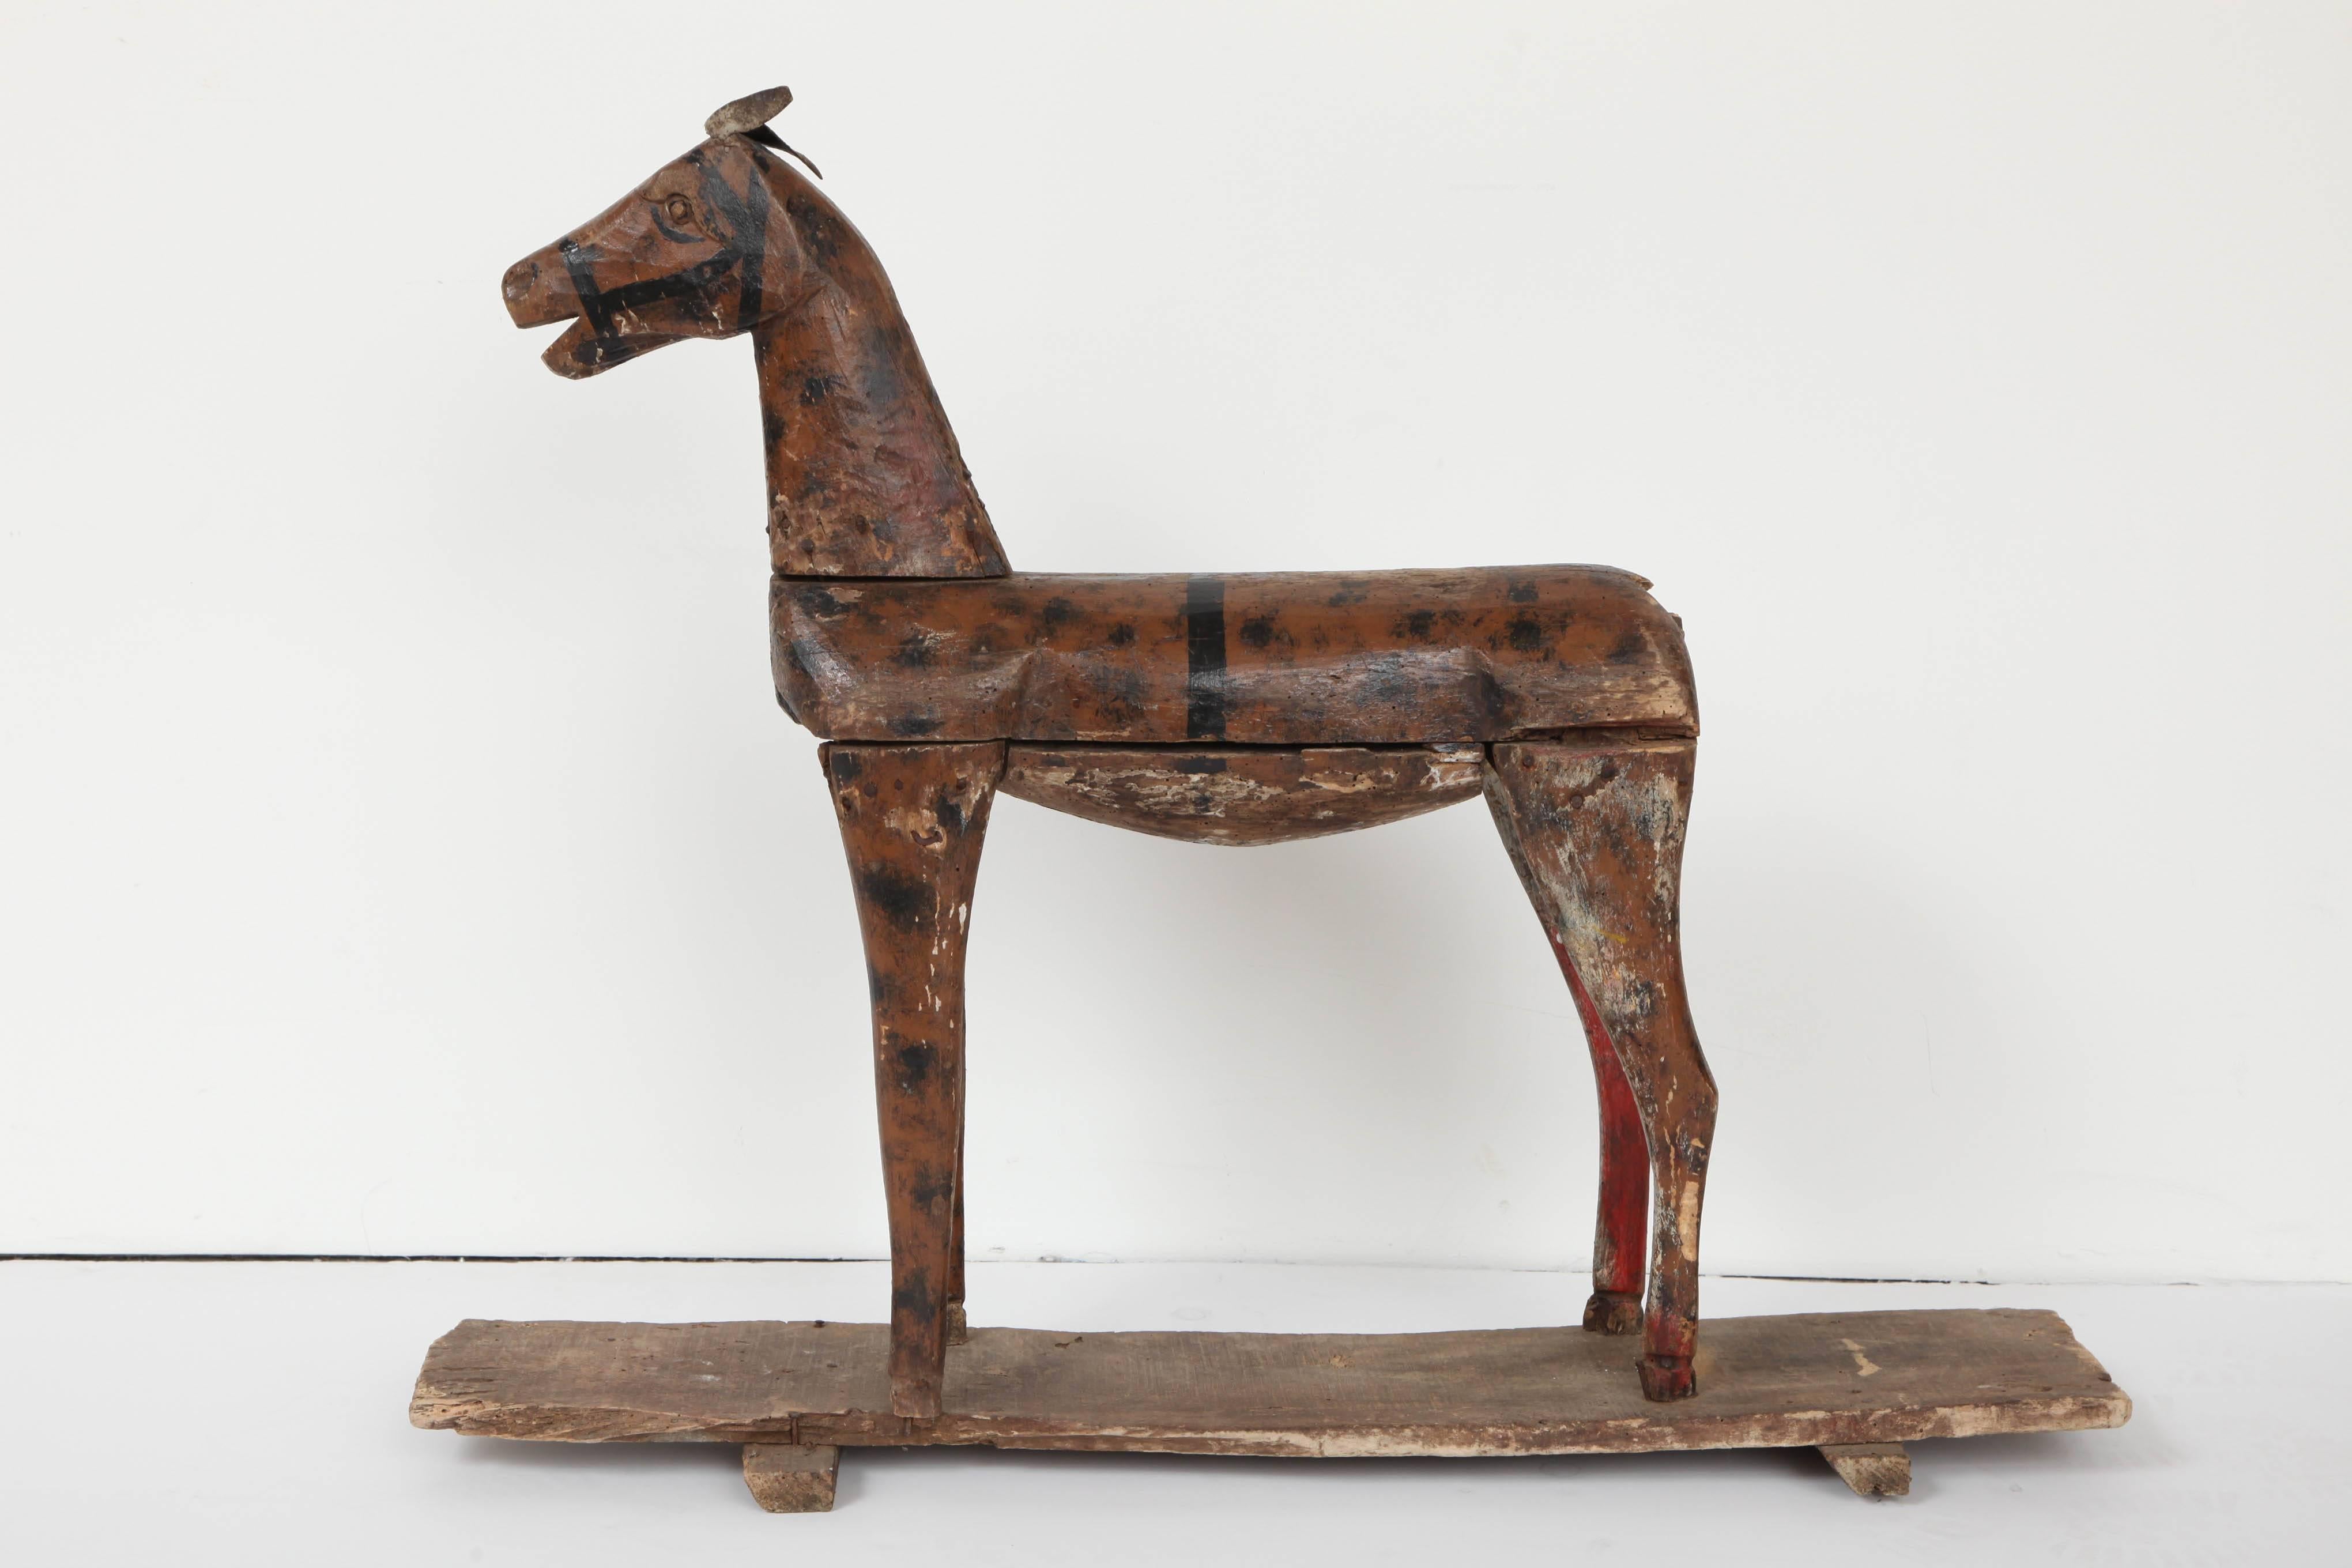 A French carved and painted wooden toy horse, late 18th century, of naive form with dappled paint and leather ears, set on a wooden base which may have had wheels at some point.